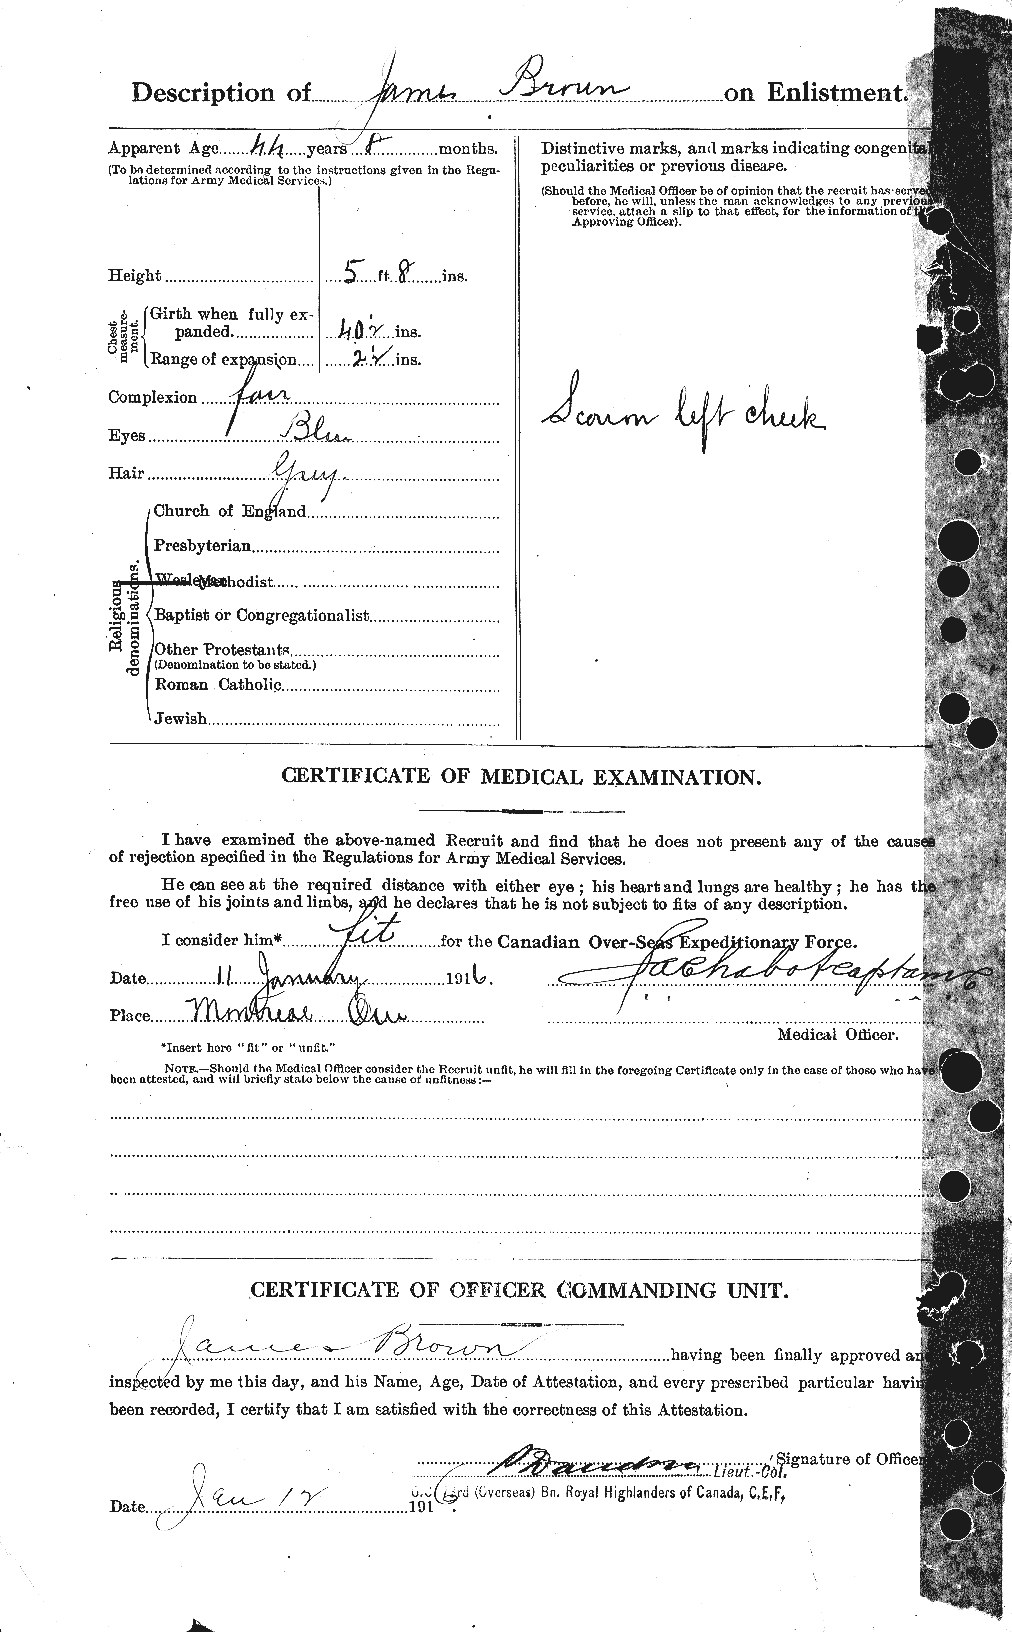 Personnel Records of the First World War - CEF 265703b